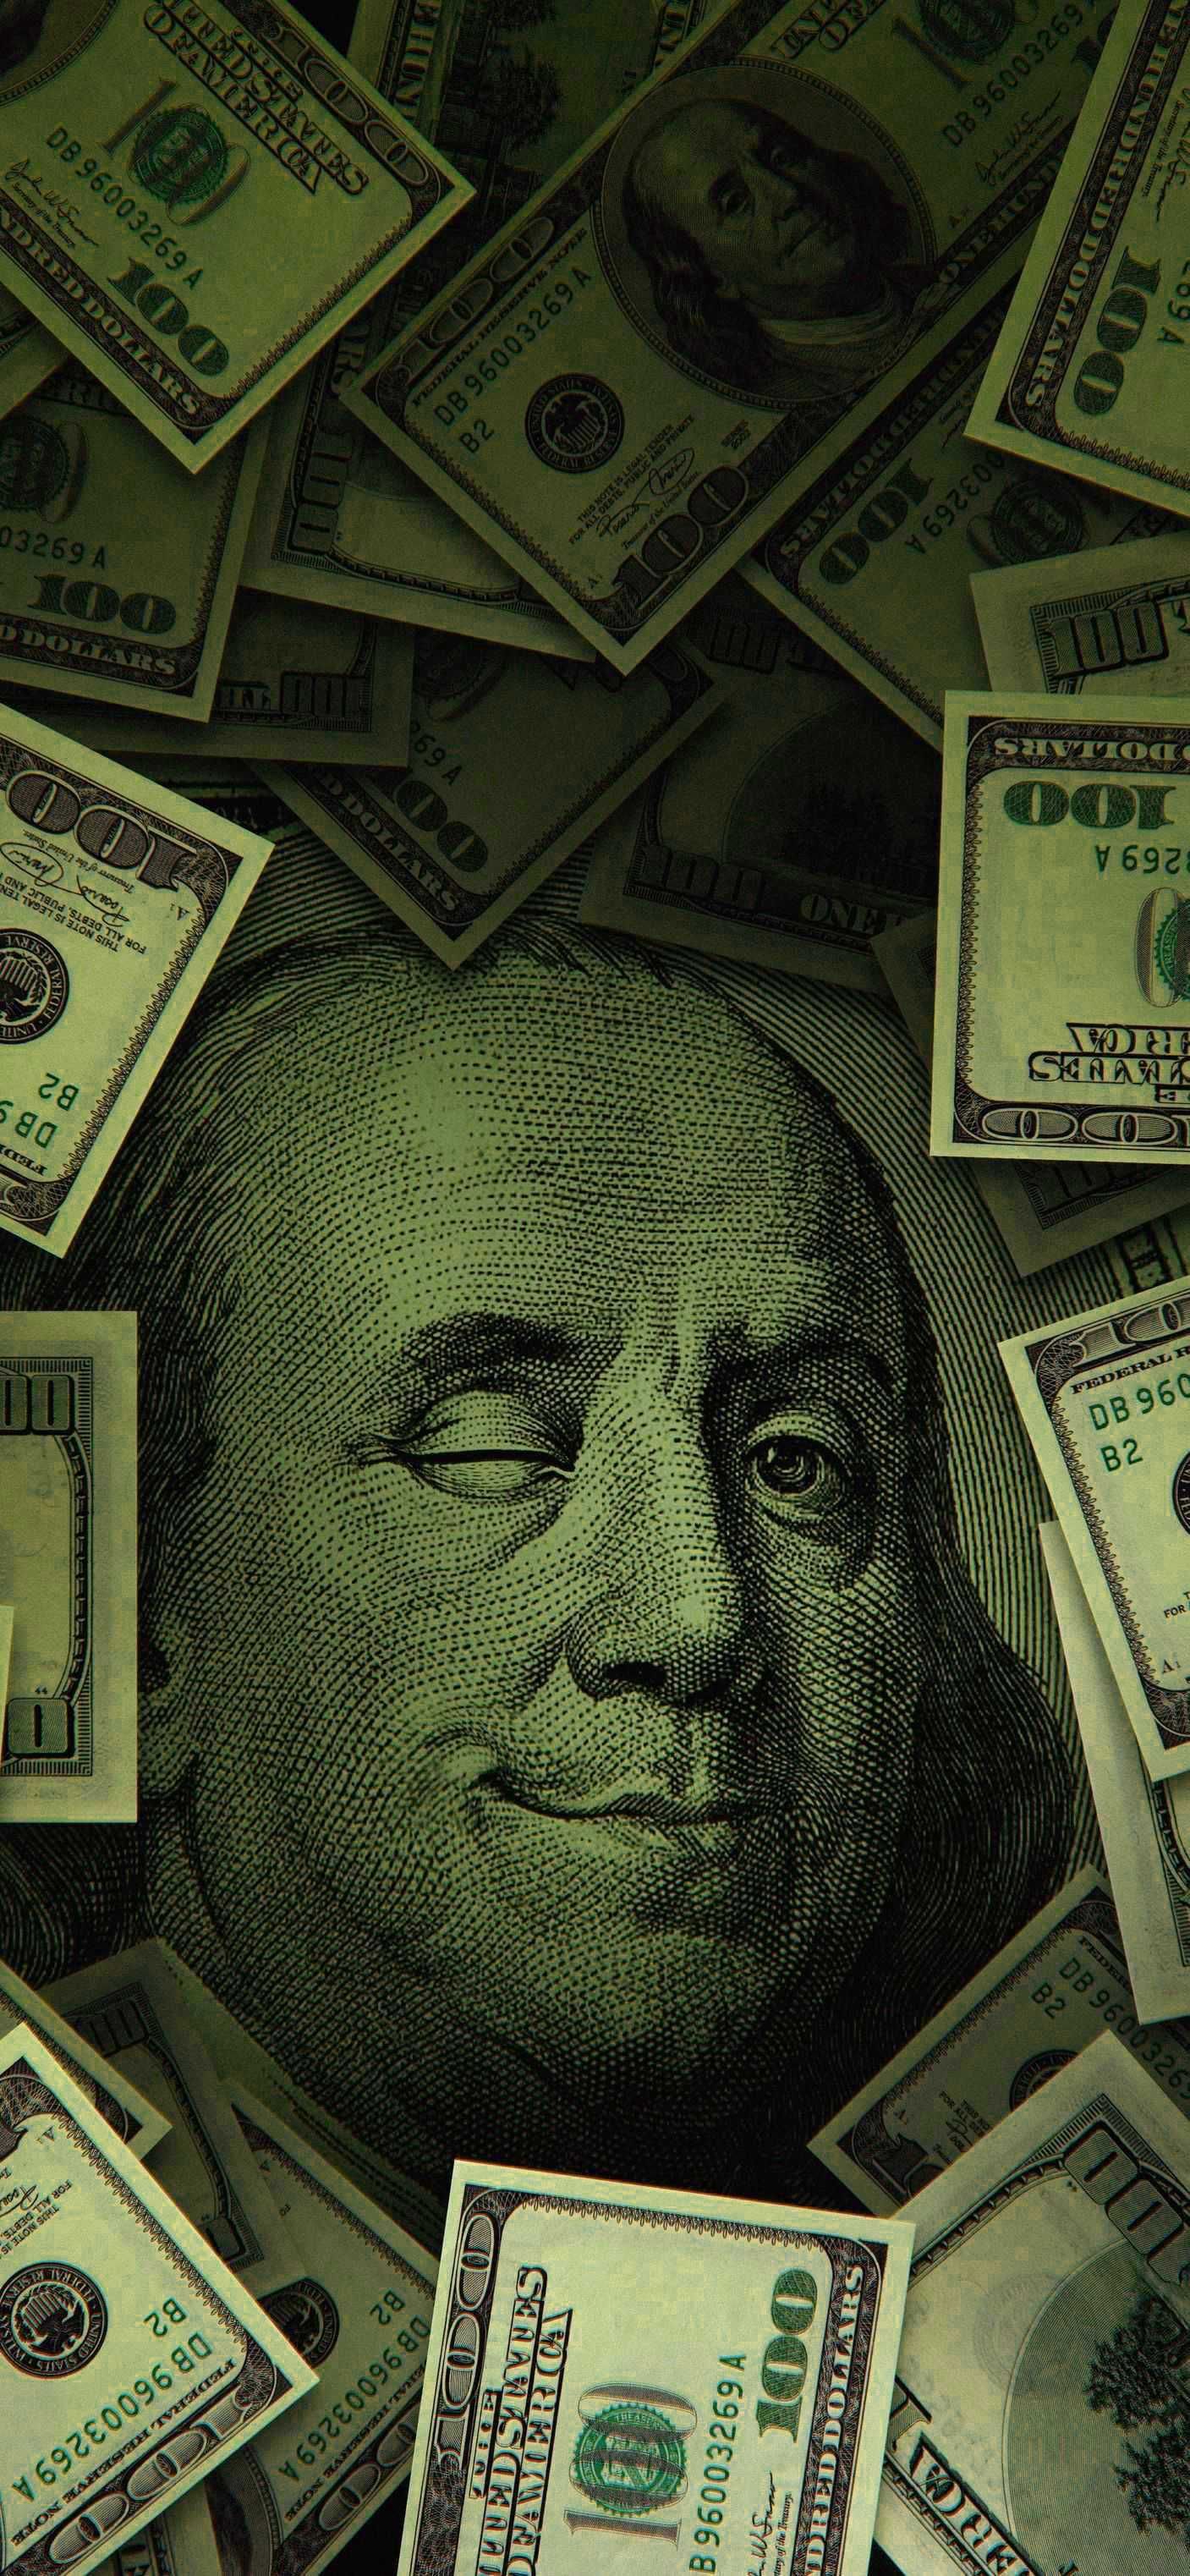 Money Wallpaper Browse Money Wallpaper with collections of Black, Girly, Gold, iPhone, Money.. Money wallpaper iphone, Hype wallpaper, Graphic wallpaper